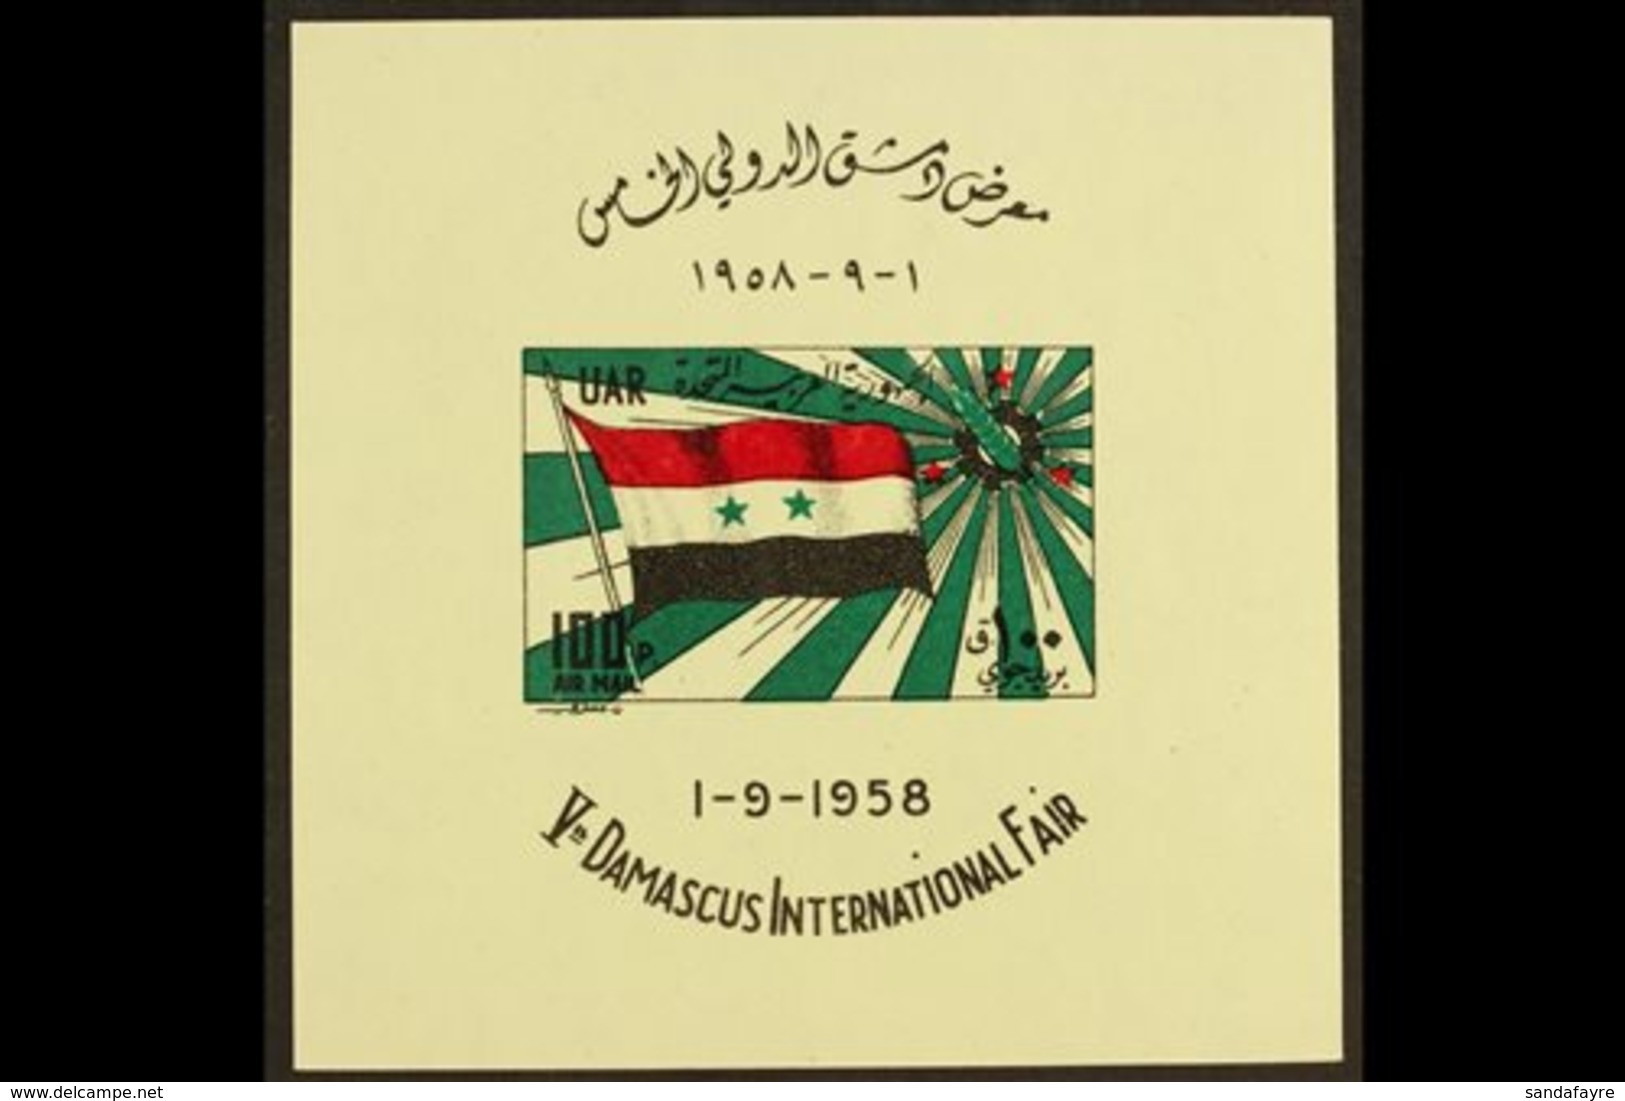 1958 Air Fifth International Fair Mini-sheet, SG MS661a, Fine Never Hinged Mint, Fresh. For More Images, Please Visit Ht - Syrien